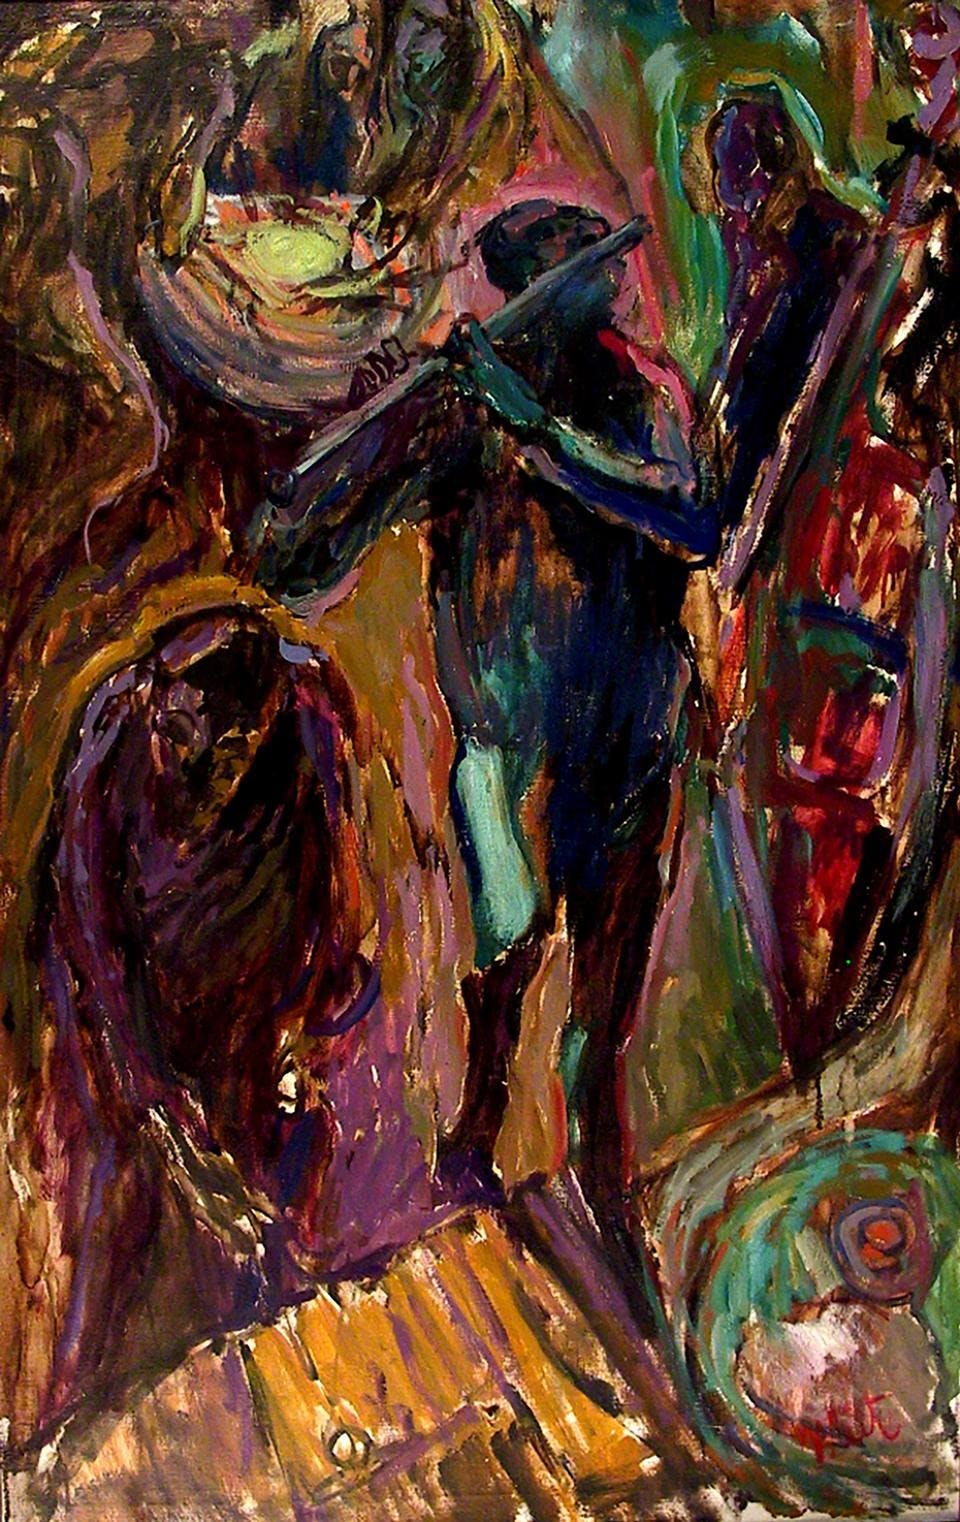 A colorful swirling painting of figures with the central figure playing a flute